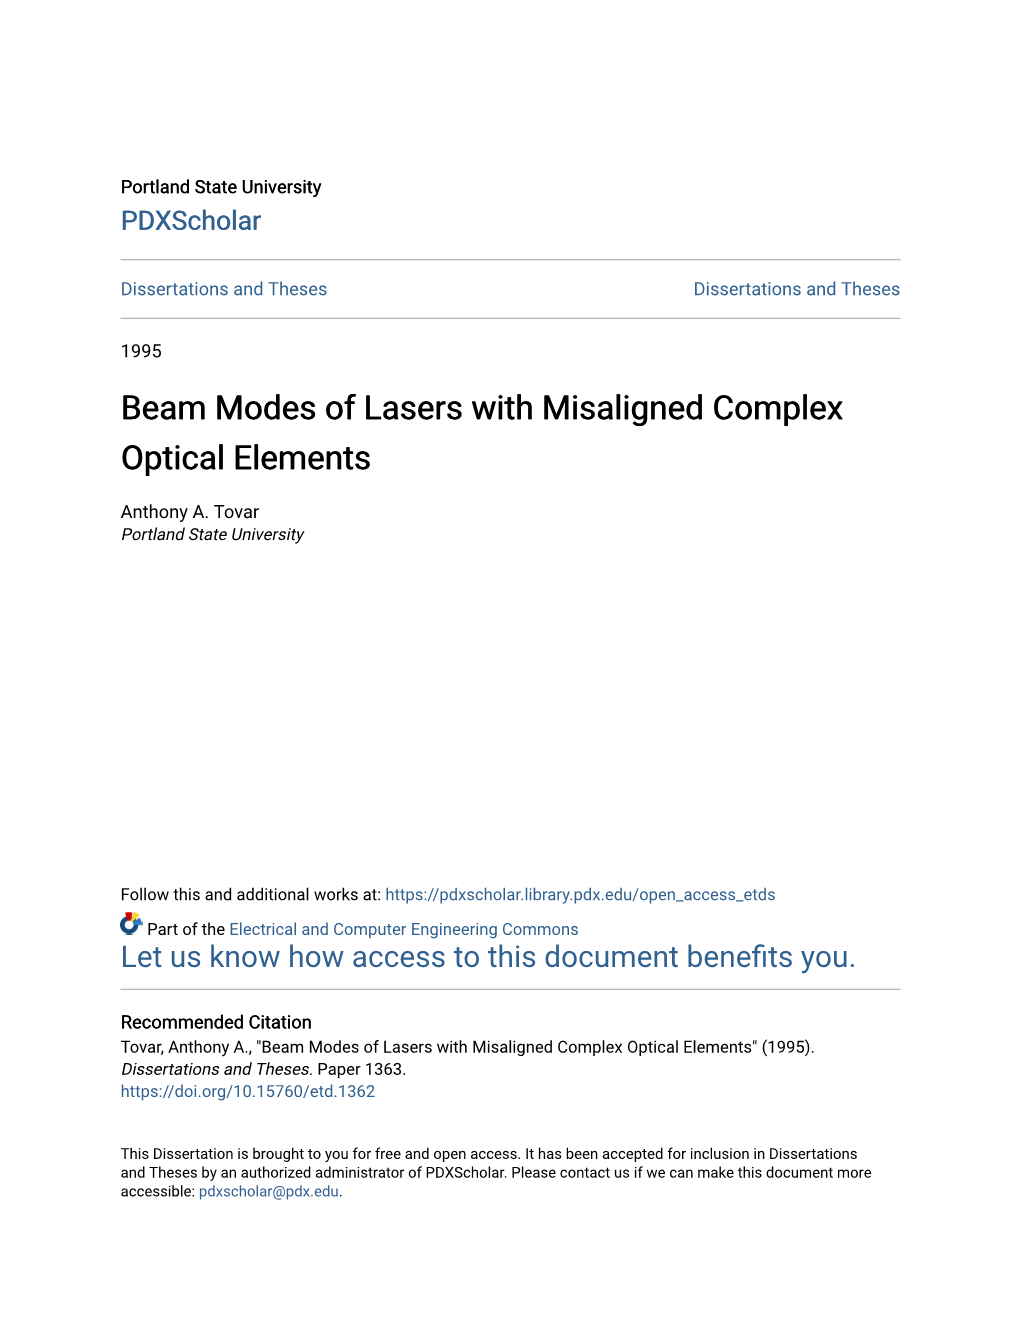 Beam Modes of Lasers with Misaligned Complex Optical Elements